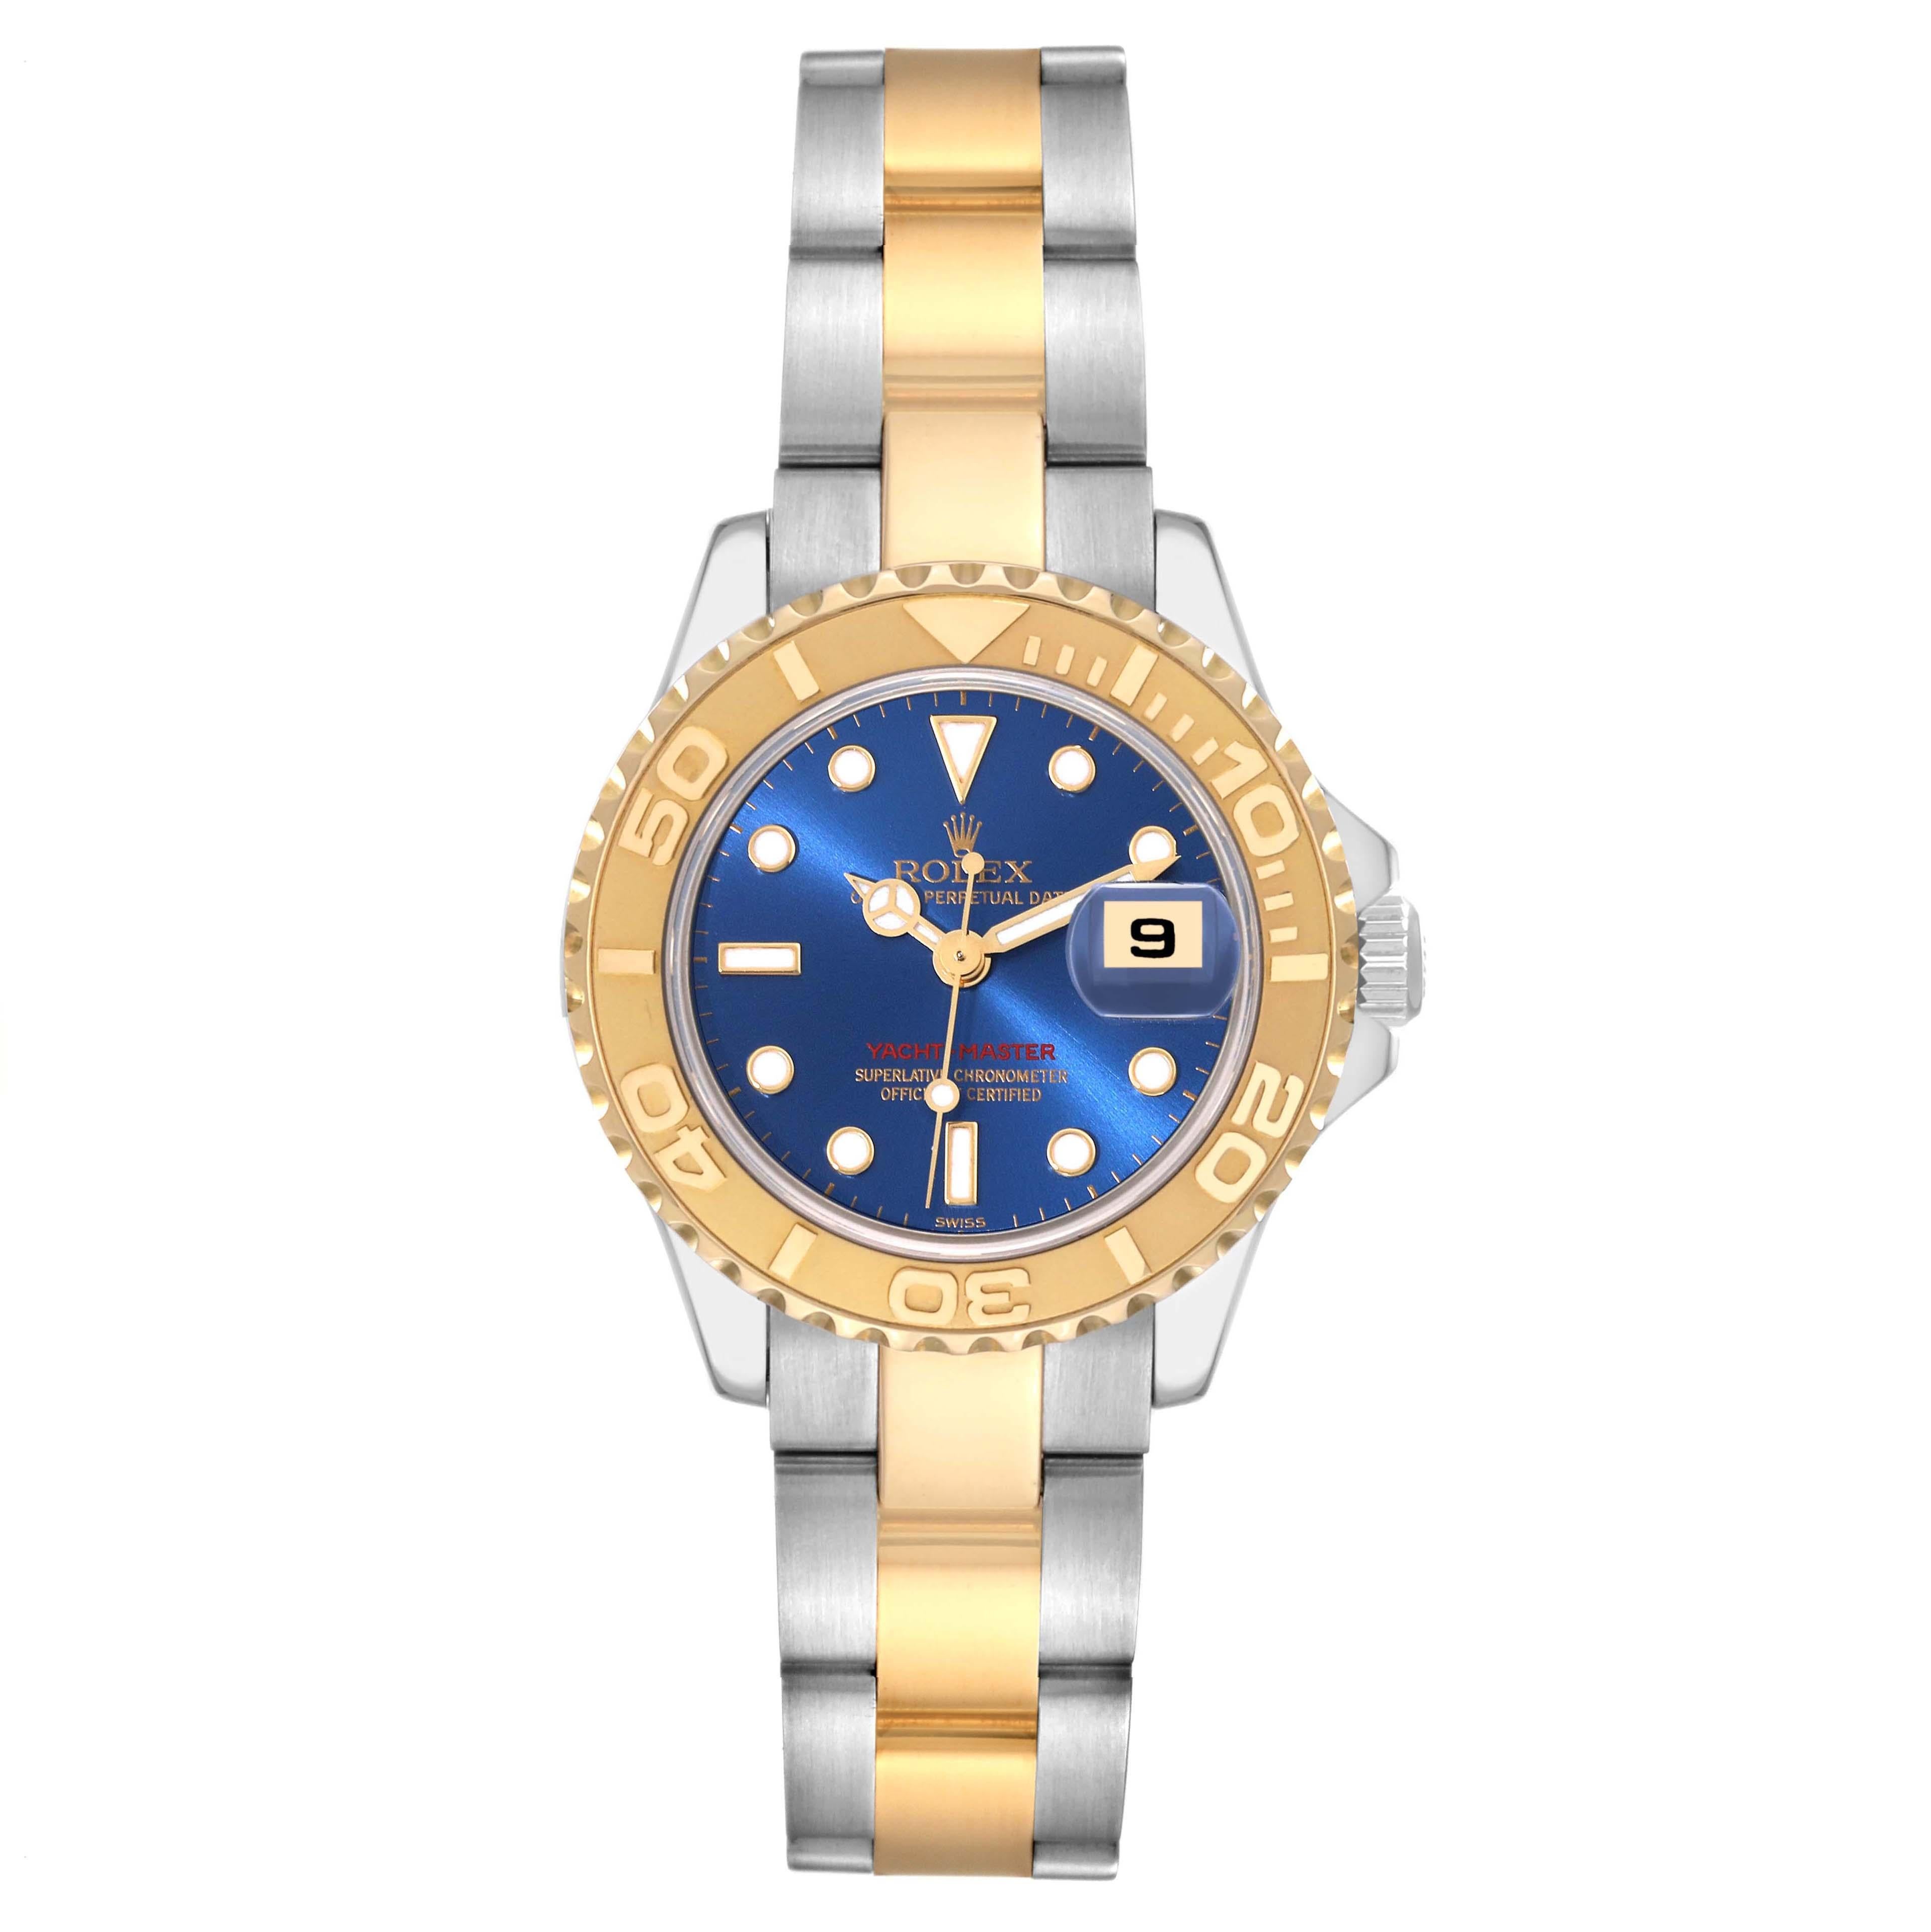 Rolex Yachtmaster Steel Yellow Gold Blue Dial Ladies Watch 169623 Box Papers. Officially certified chronometer automatic self-winding movement. Stainless steel and 18K yellow gold case 29 mm in diameter. Rolex logo on the crown. 18K yellow gold